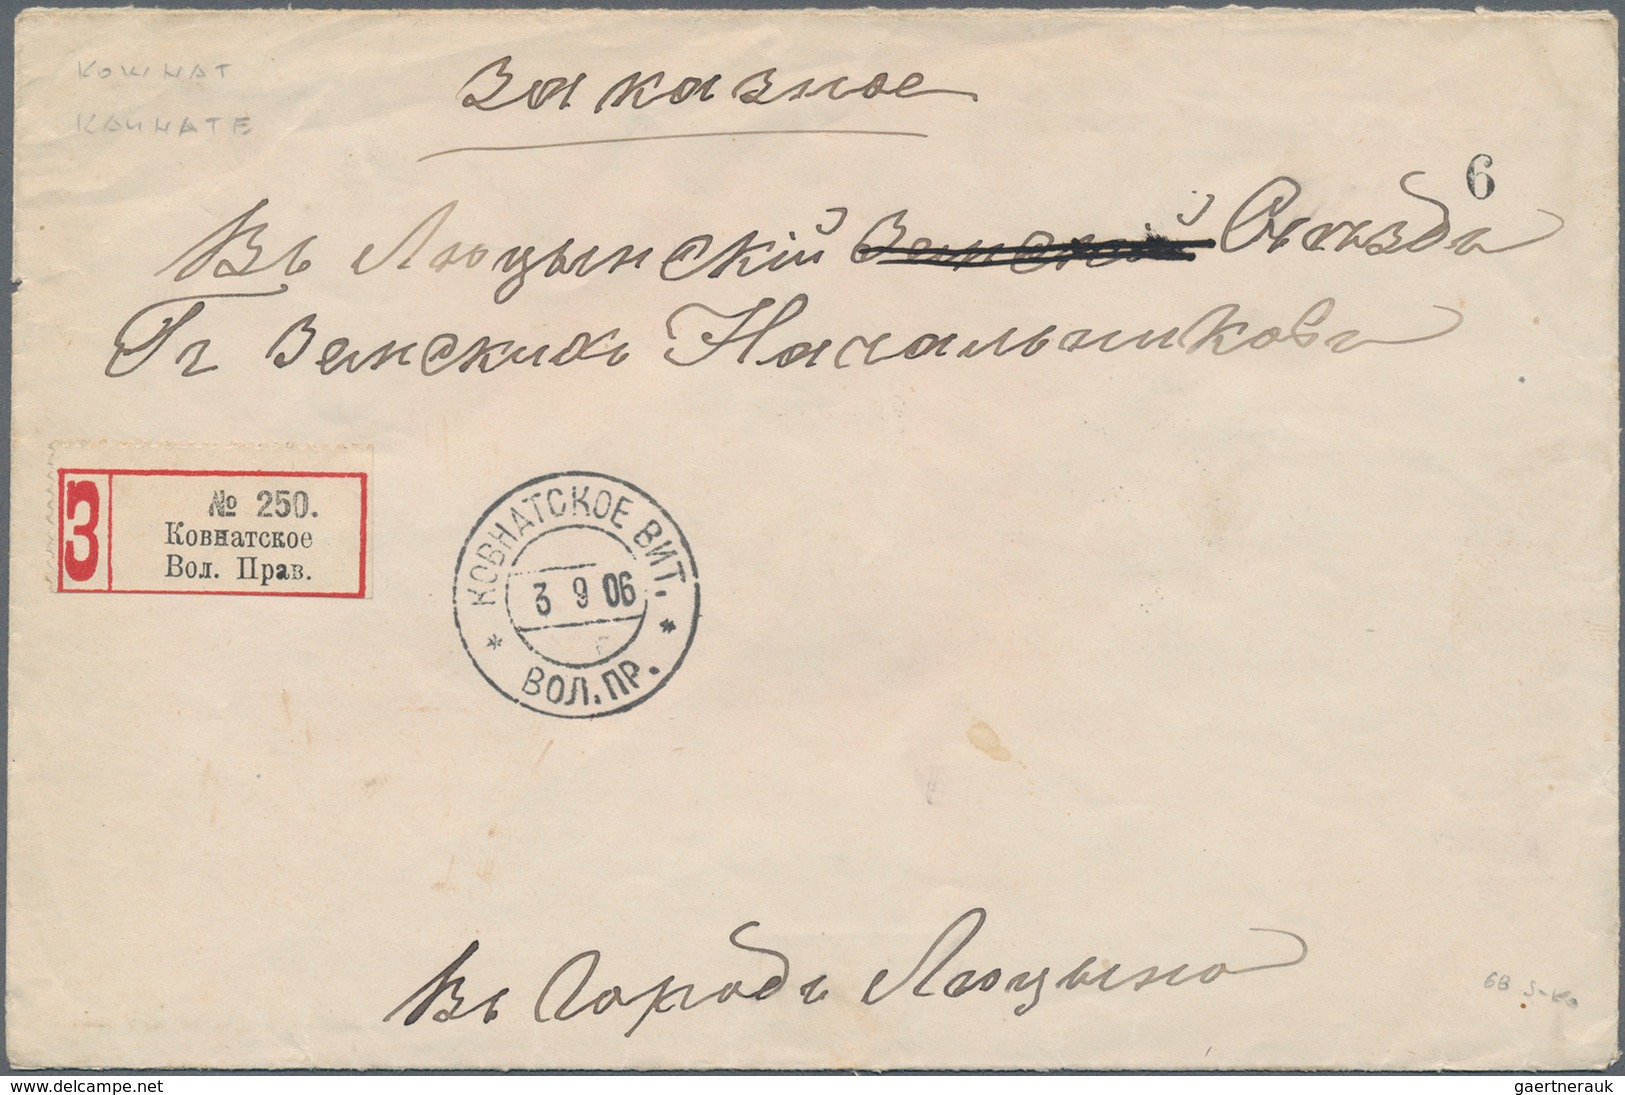 Russland: 1860/1917 fantastic collection of the postal history of the Baltic States of the Tsarist p